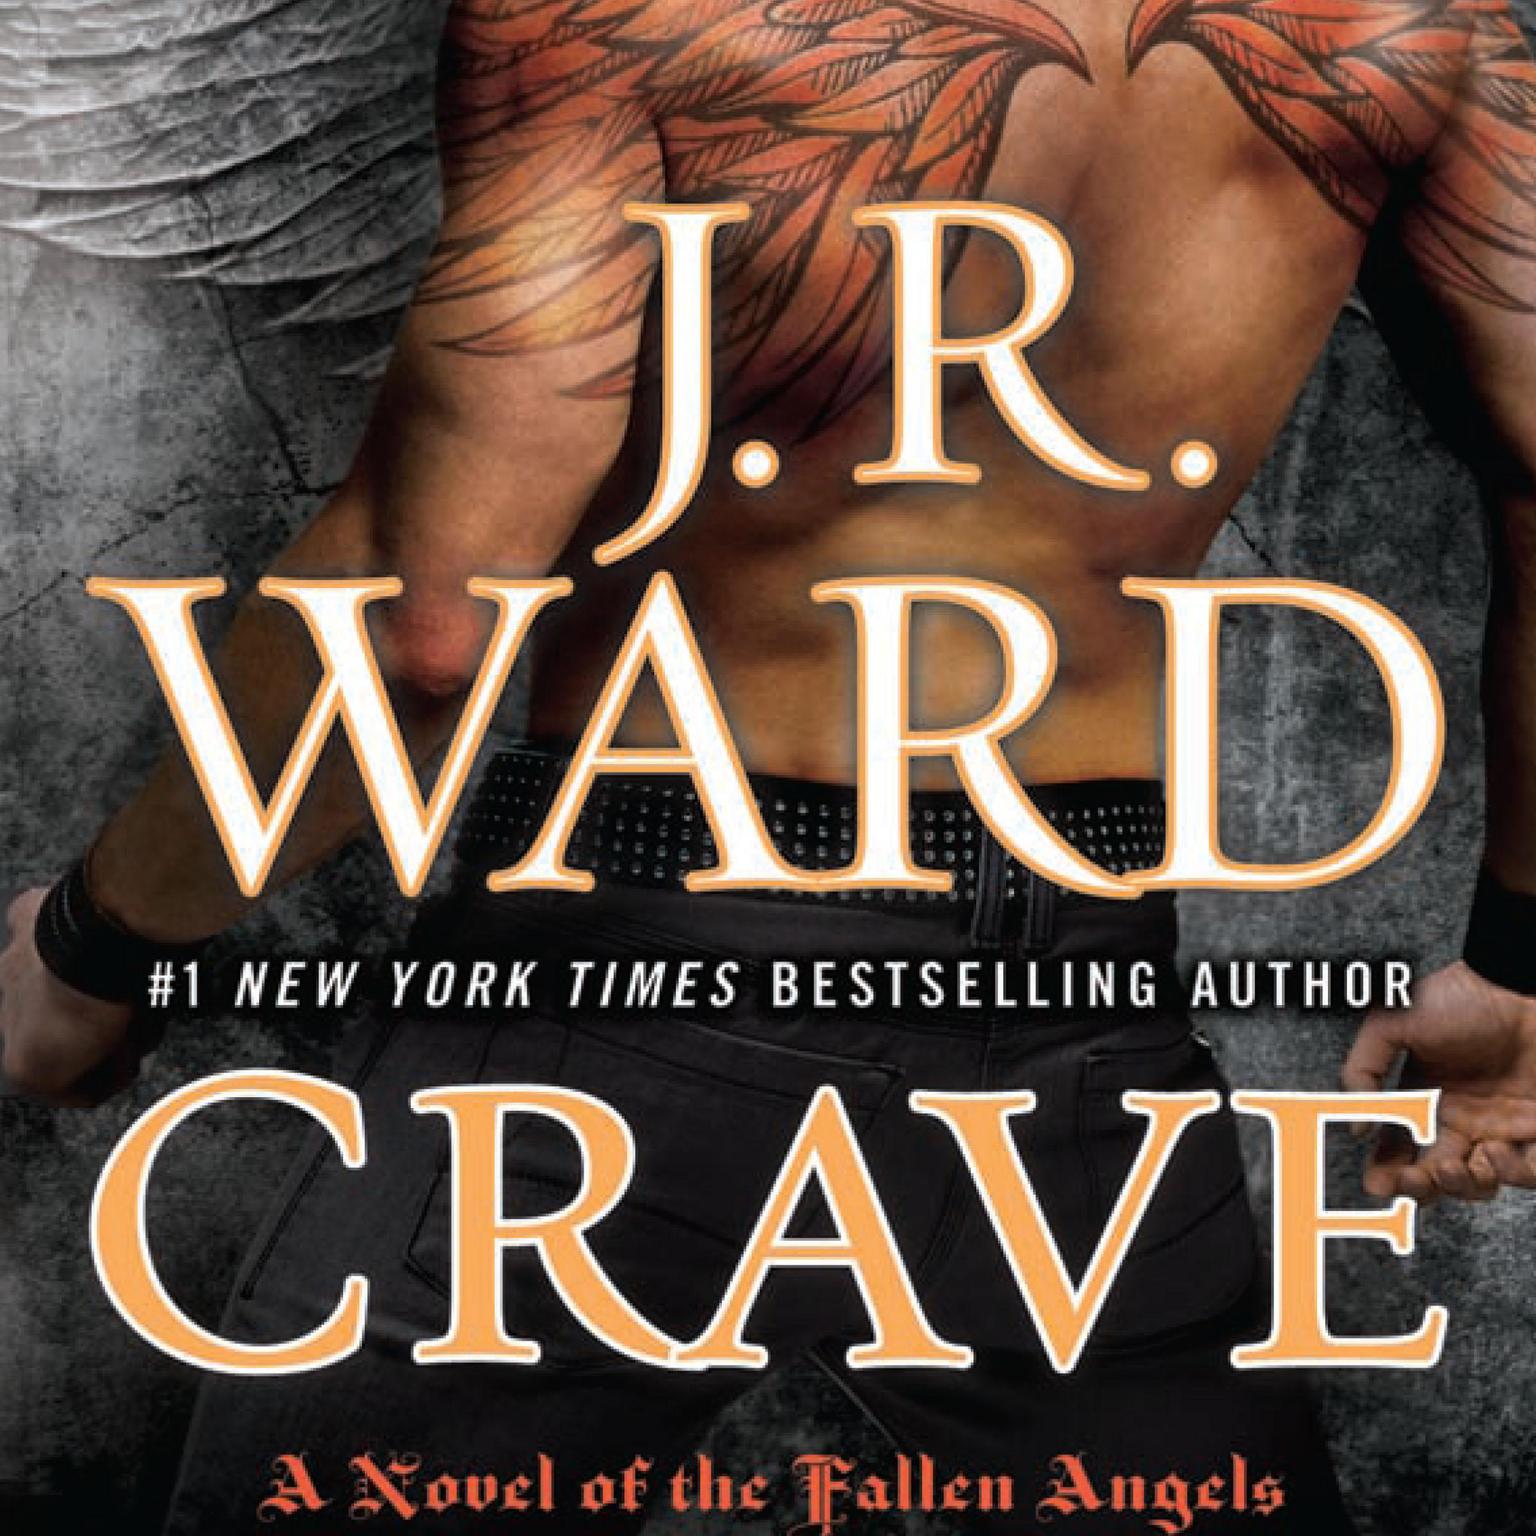 Crave: A Novel of the Fallen Angels Audiobook, by J. R. Ward